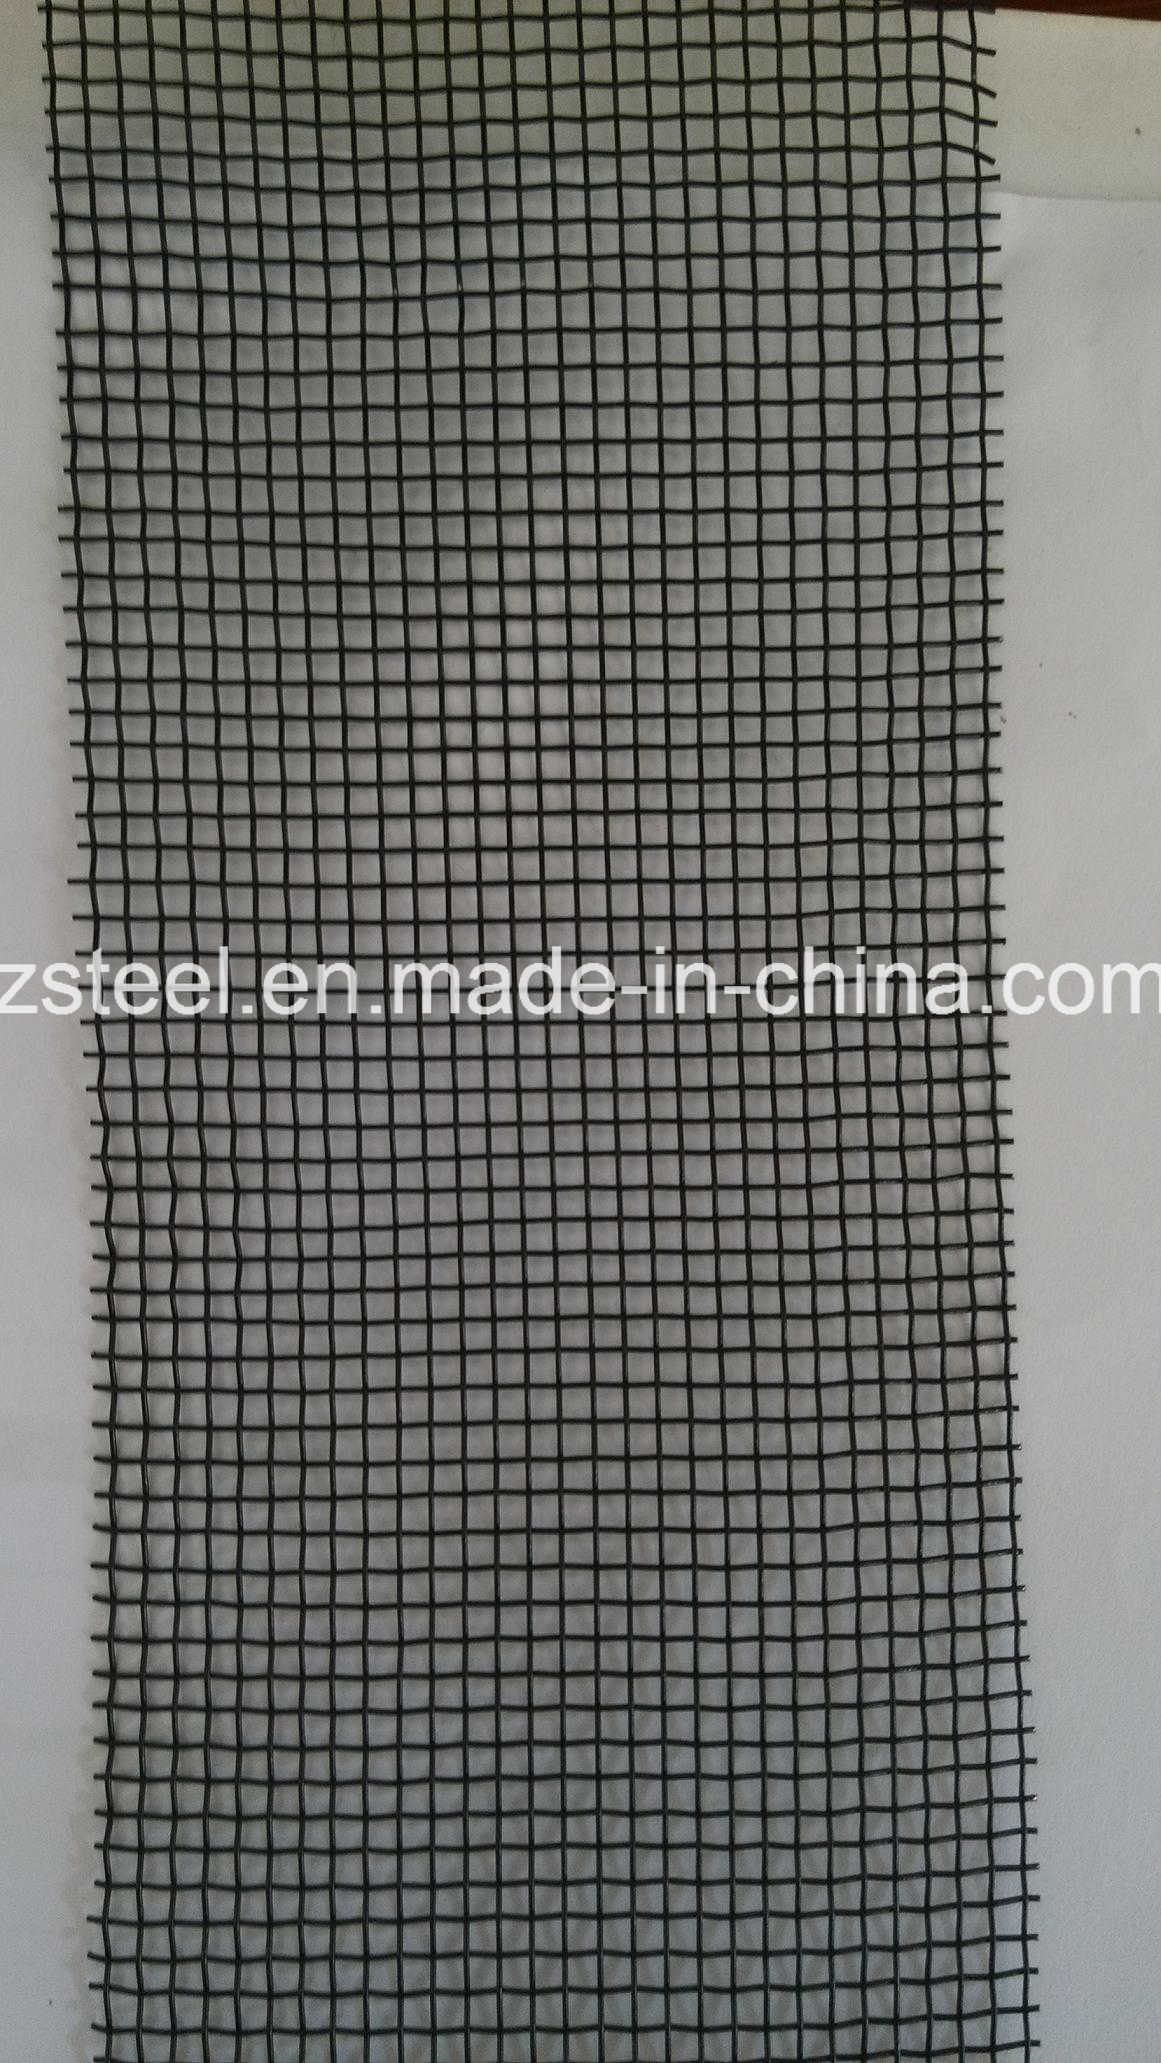 Stainless Steel/Annealed Iron Wire/Epoxy Painting Wire Mesh for Filter Oil/Water/Air/Fuel with SGS CE